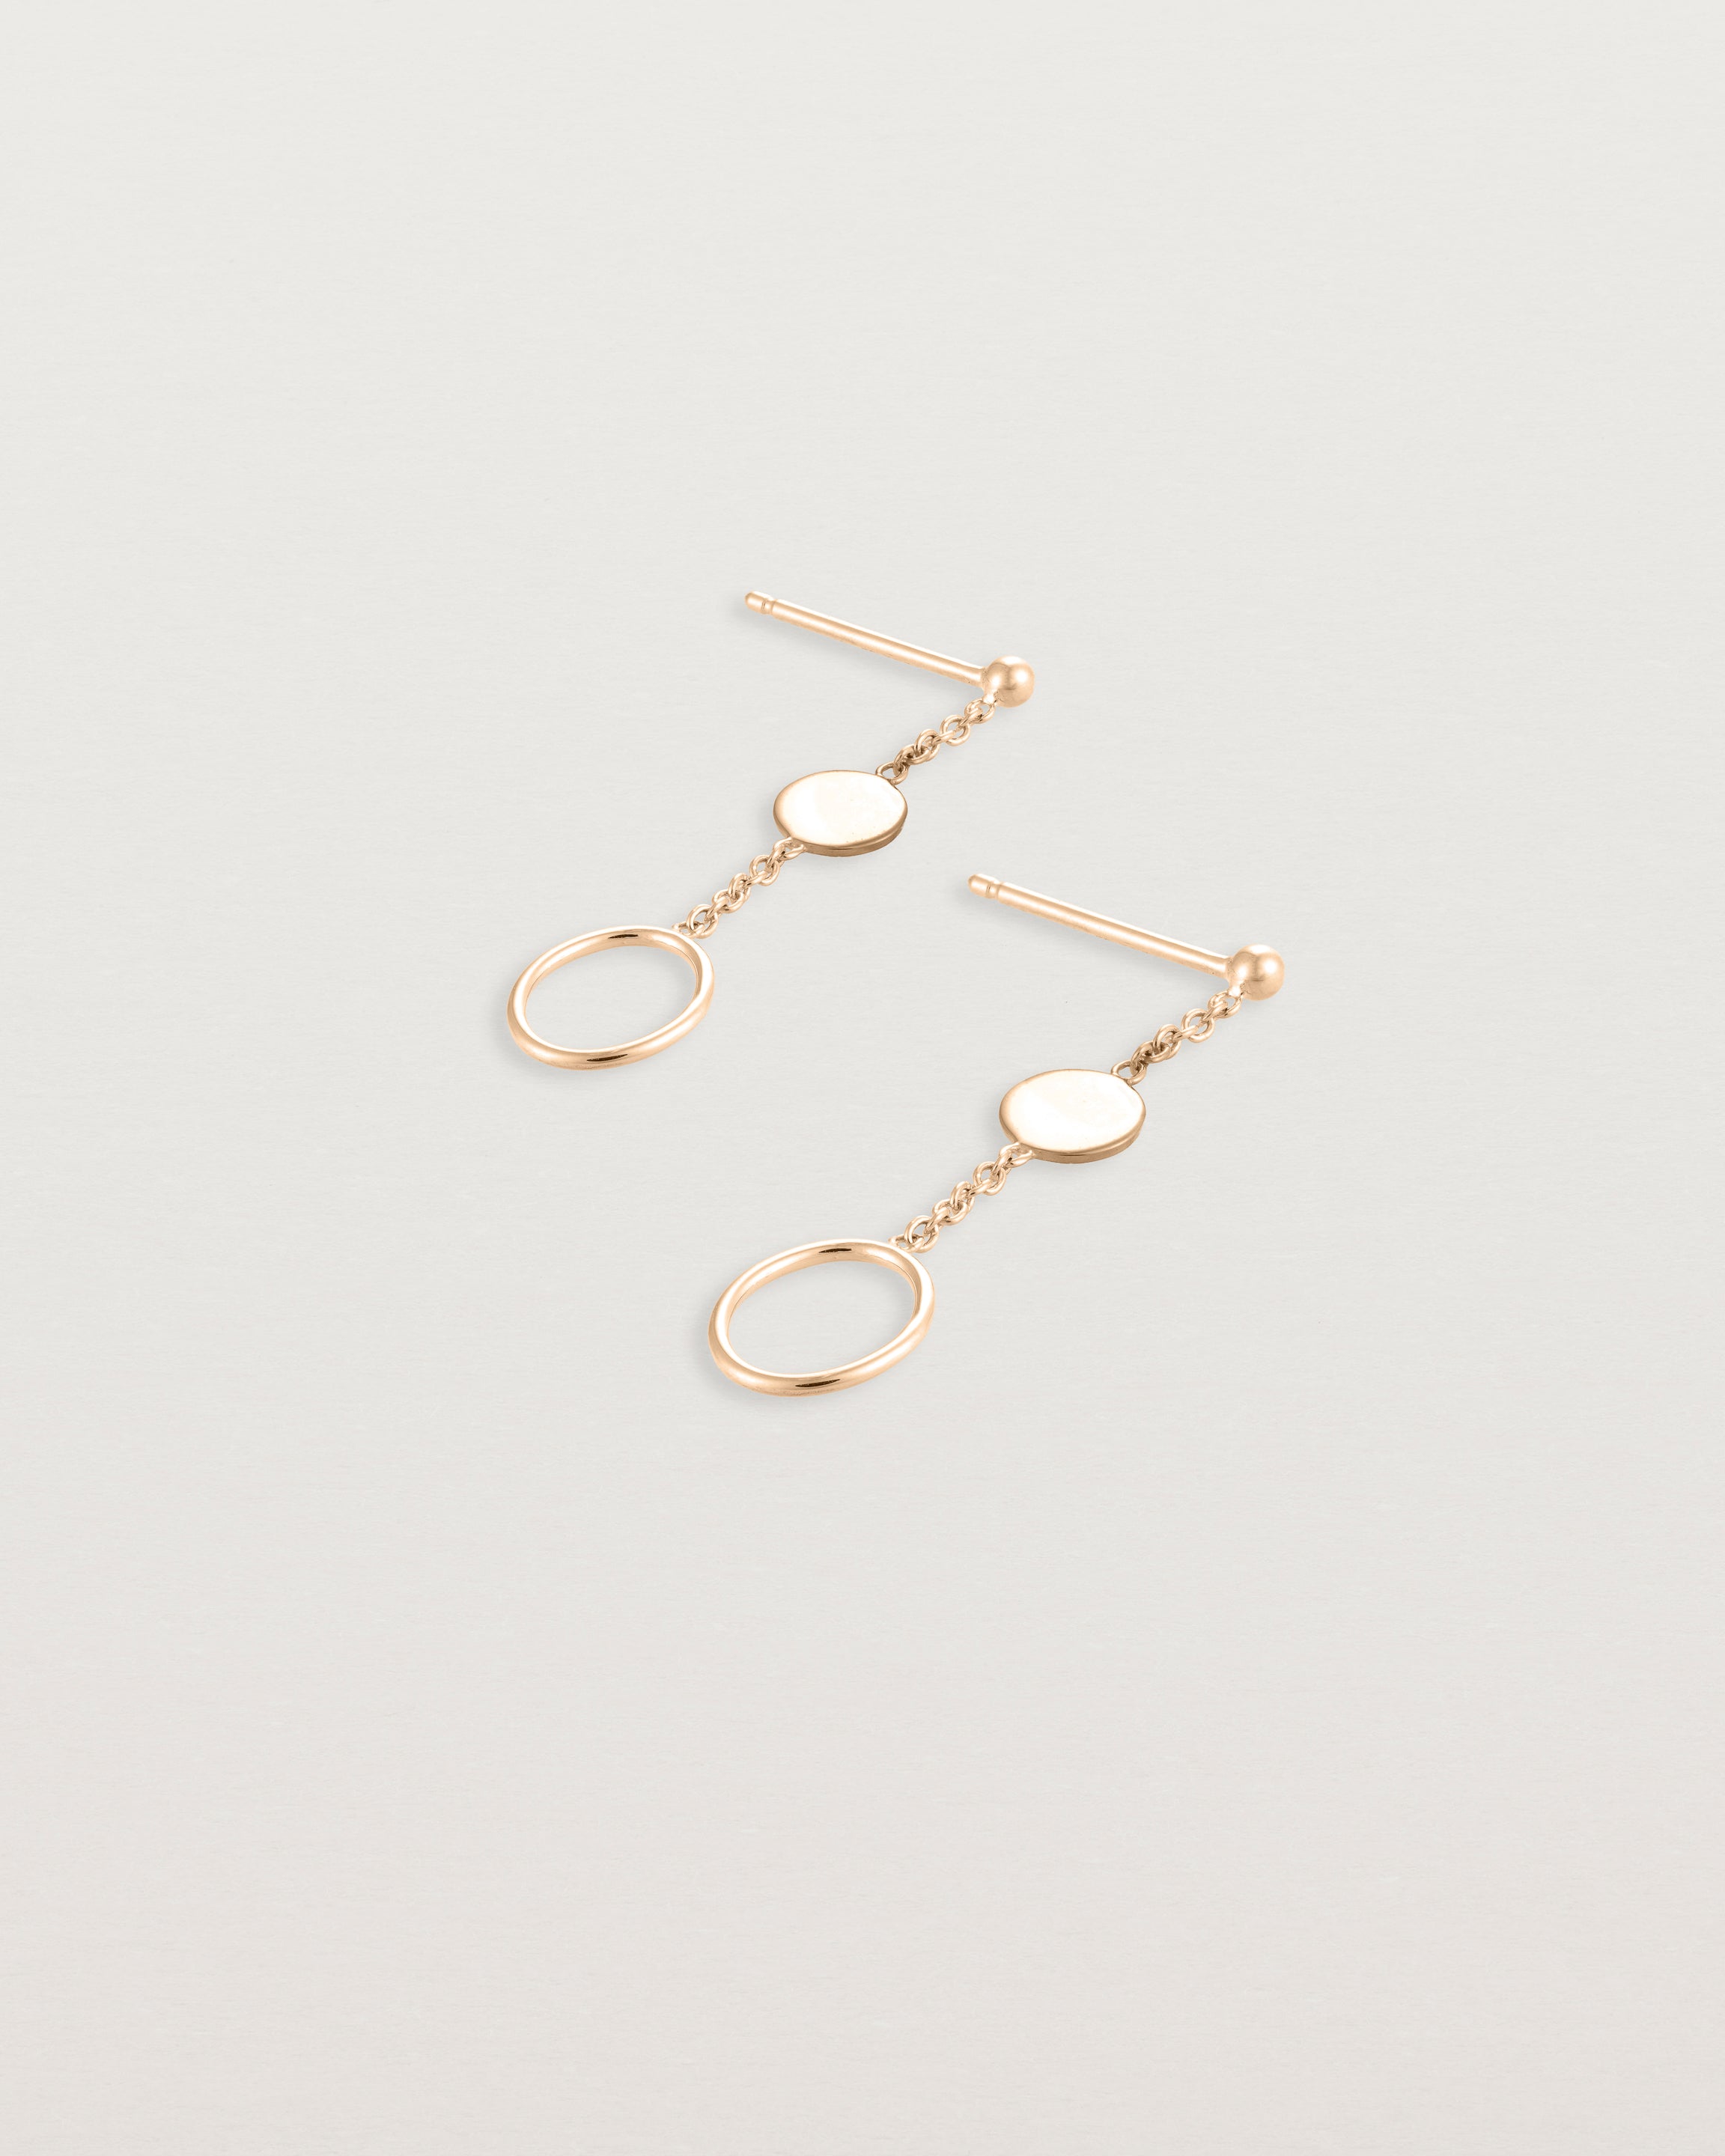 Side view of the Aiyana Earrings in Rose Gold.